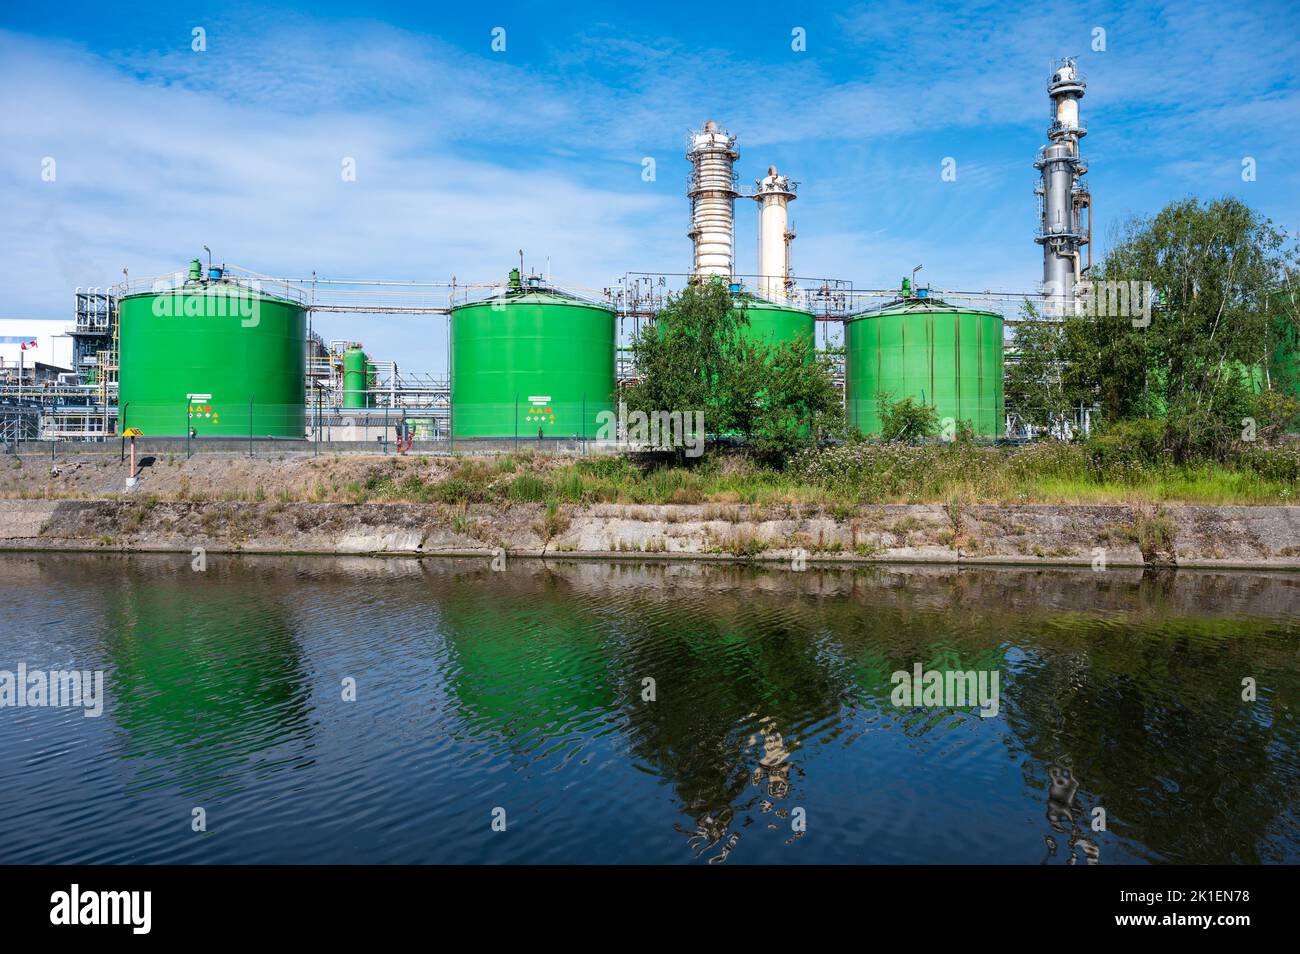 Jemeppe-Sur-Sambre, Wallon Region, Belgium, 07 29 2022 - The Ineos company industrial plant for the production of vinyl and organic chlorine derivates Stock Photo